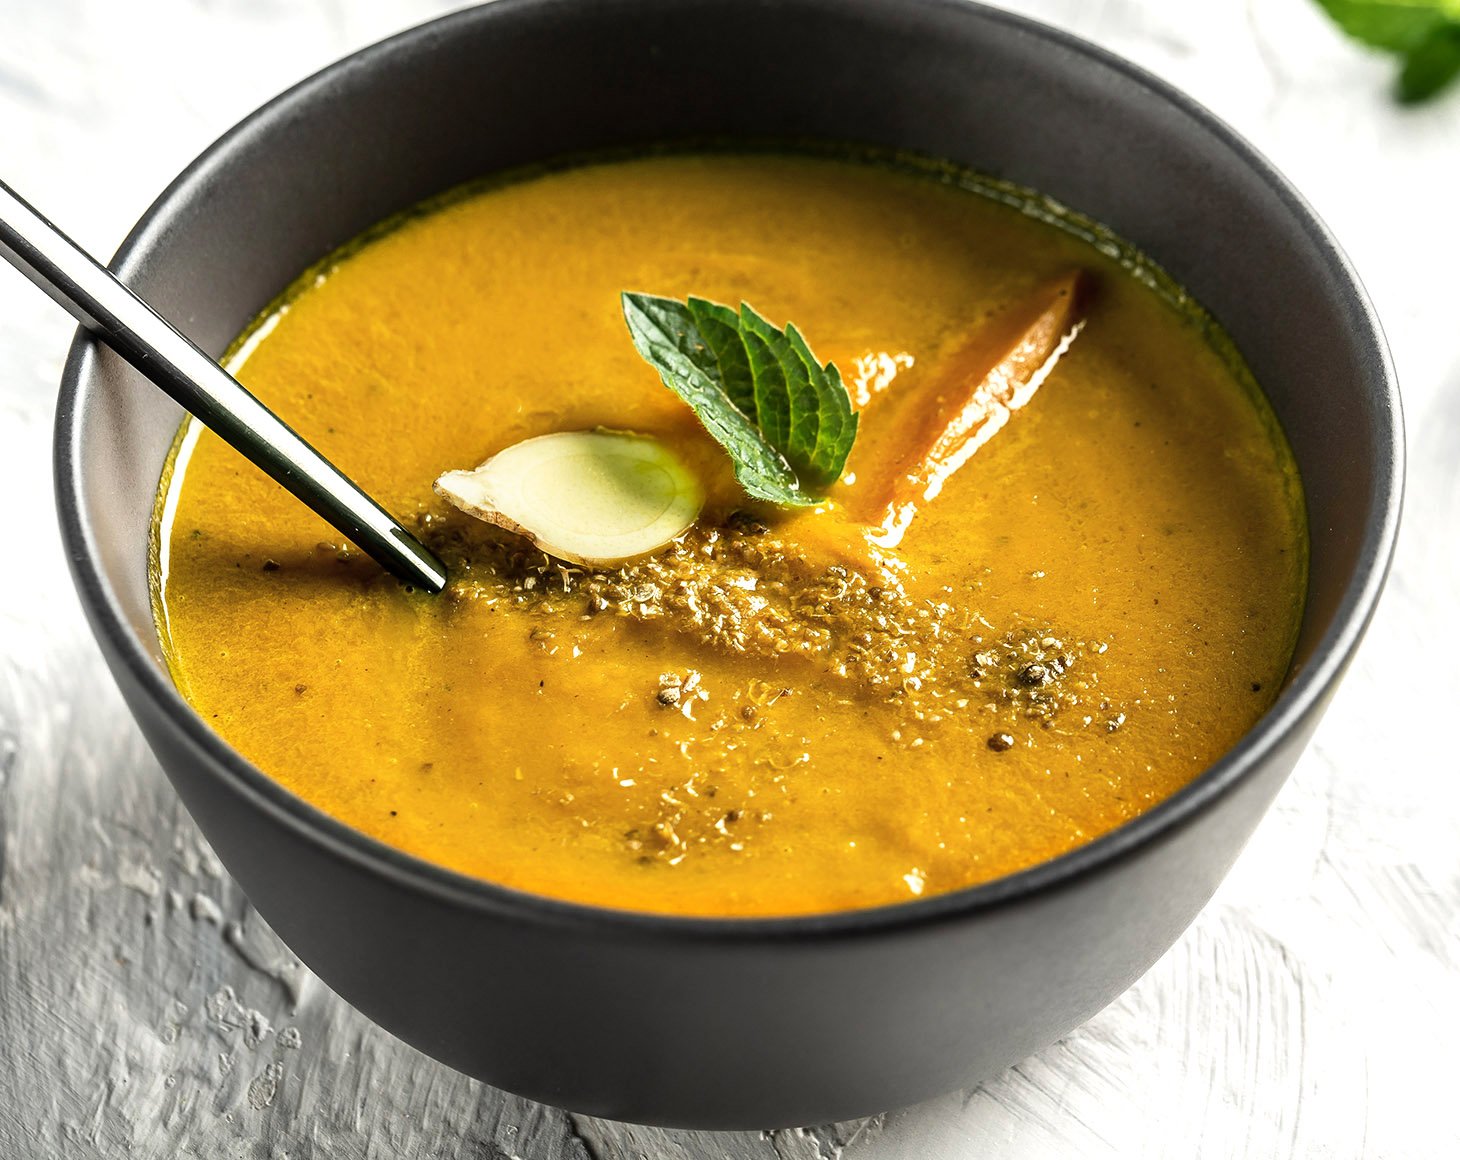 carrot-soup-with-organic-broccoli-sprout-powder